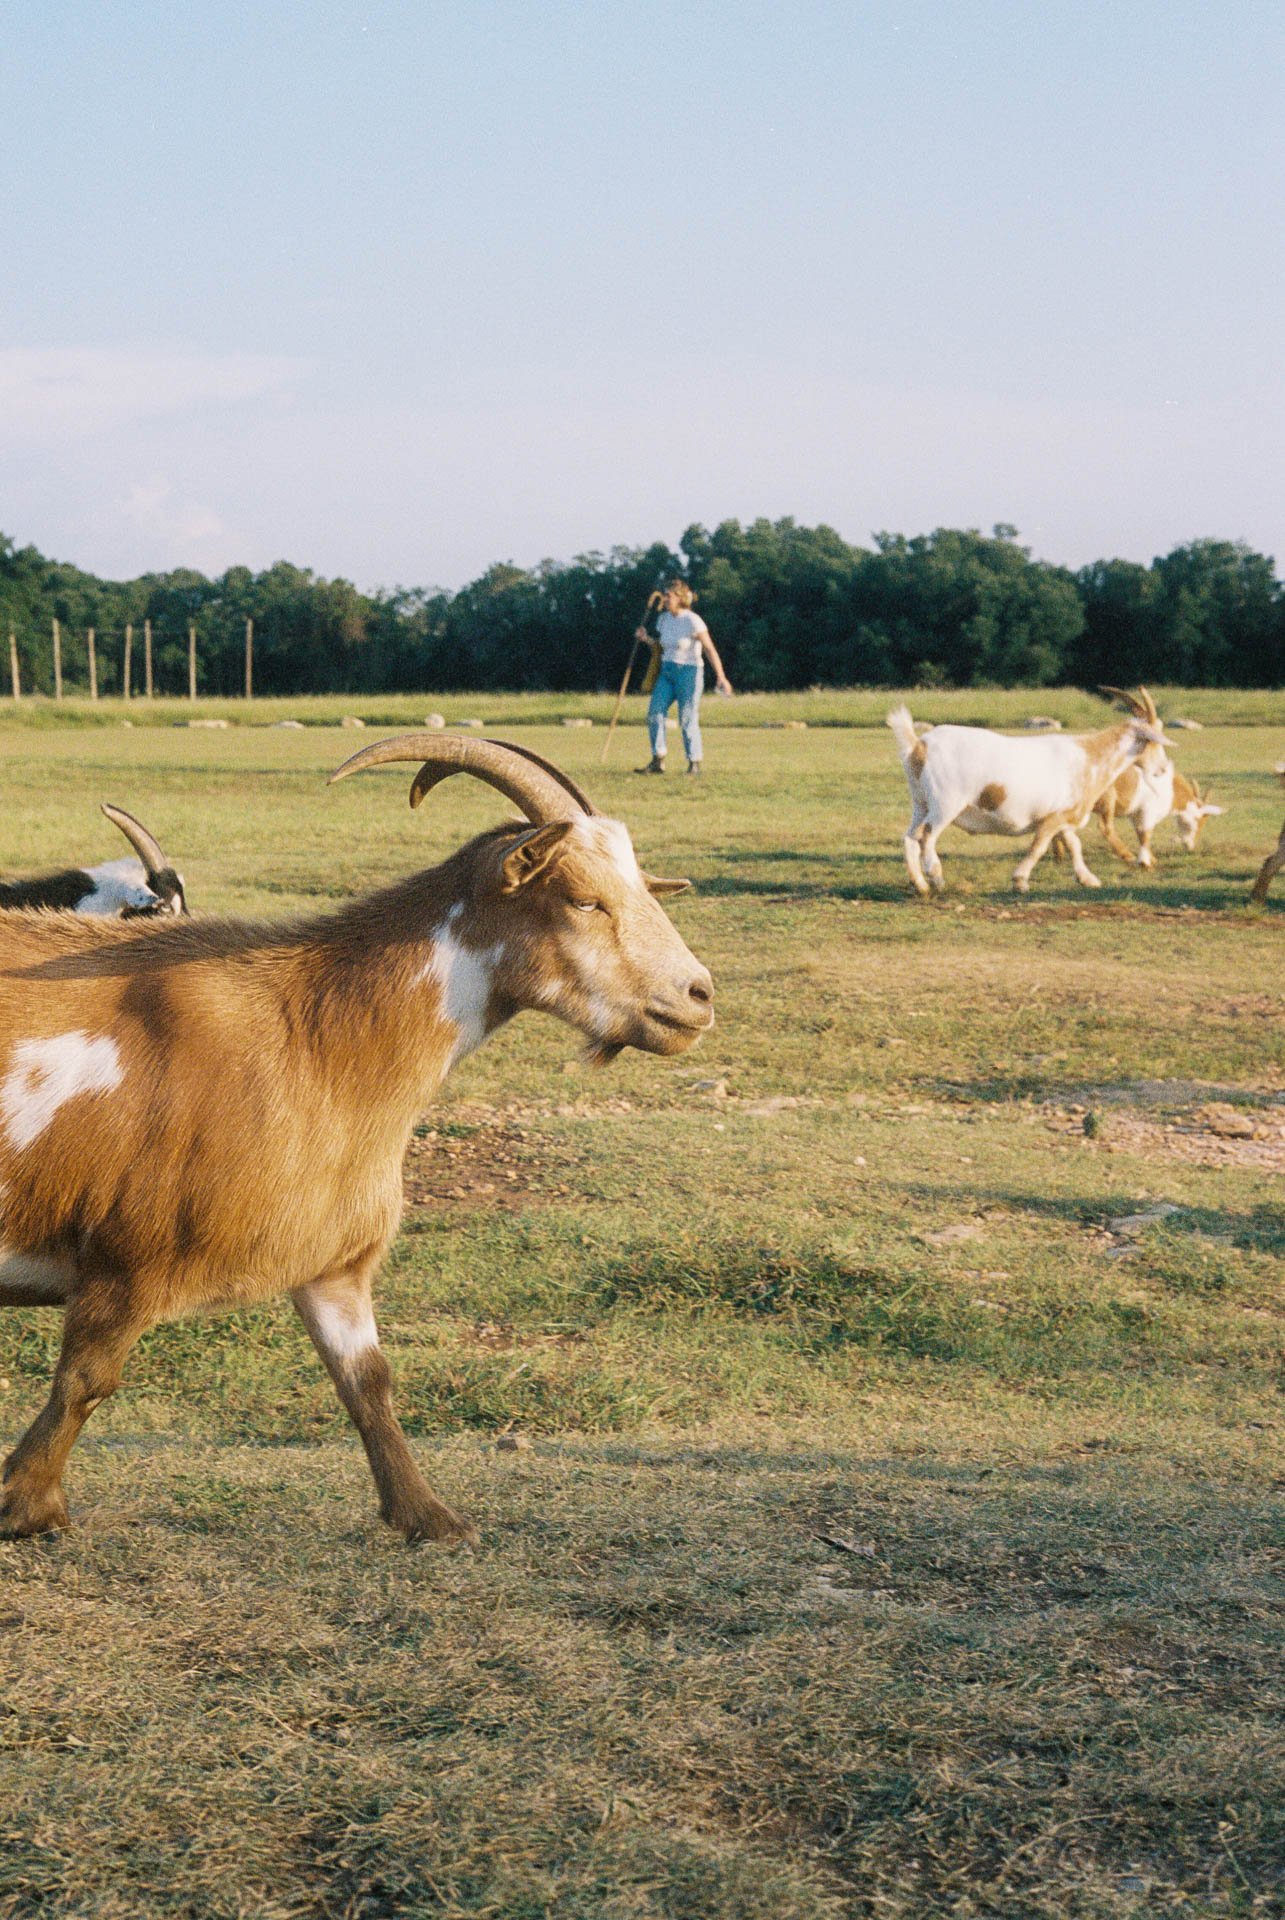 Goats-at-Jester-King-Brewing-in-Texas-on-Film-2.jpg